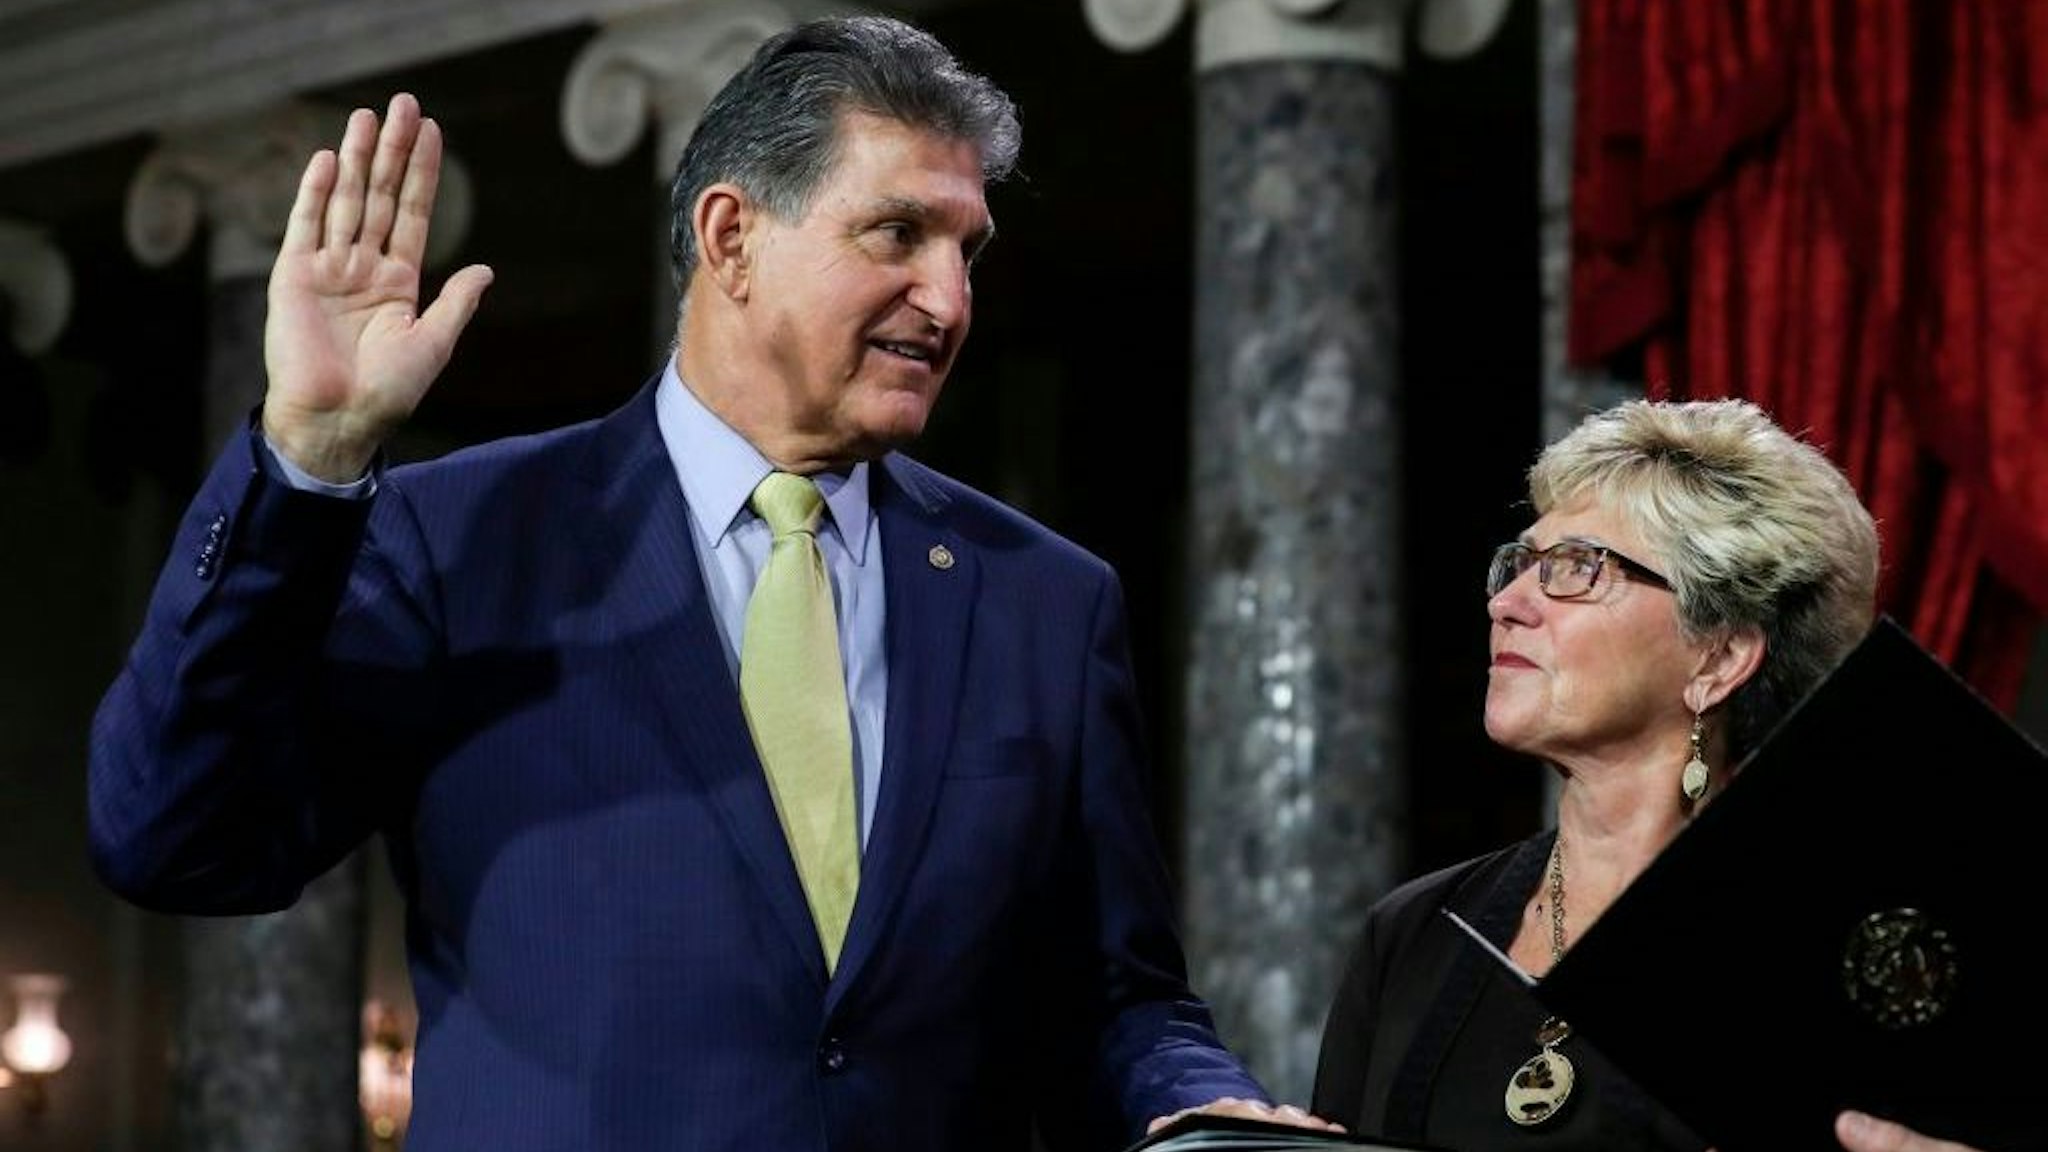 US Senator from West Virginia (D) Joe Manchin III is flanked his wife Gayle as he is sworn in by Vice President Mike Pence (out of frame) during the swearing-in re-enactments for recently elected senators in the Old Senate Chamber on Capitol Hill in Washington, DC January 3, 2019. (Photo by Alex EDELMAN / AFP) (Photo credit should read ALEX EDELMAN/AFP via Getty Images)